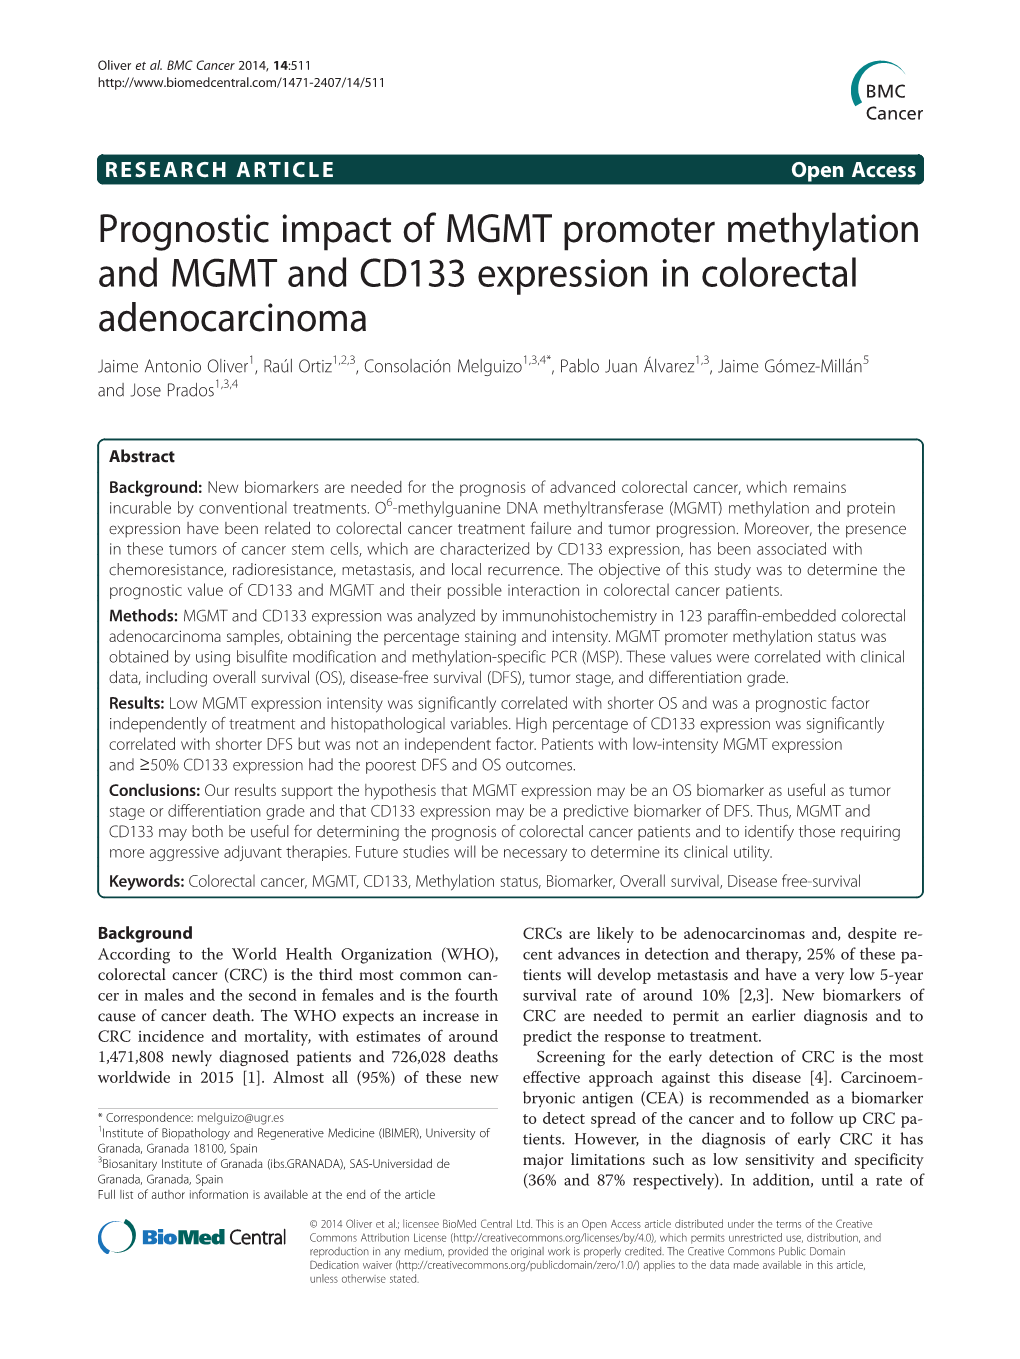 Prognostic Impact of MGMT Promoter Methylation and MGMT and CD133